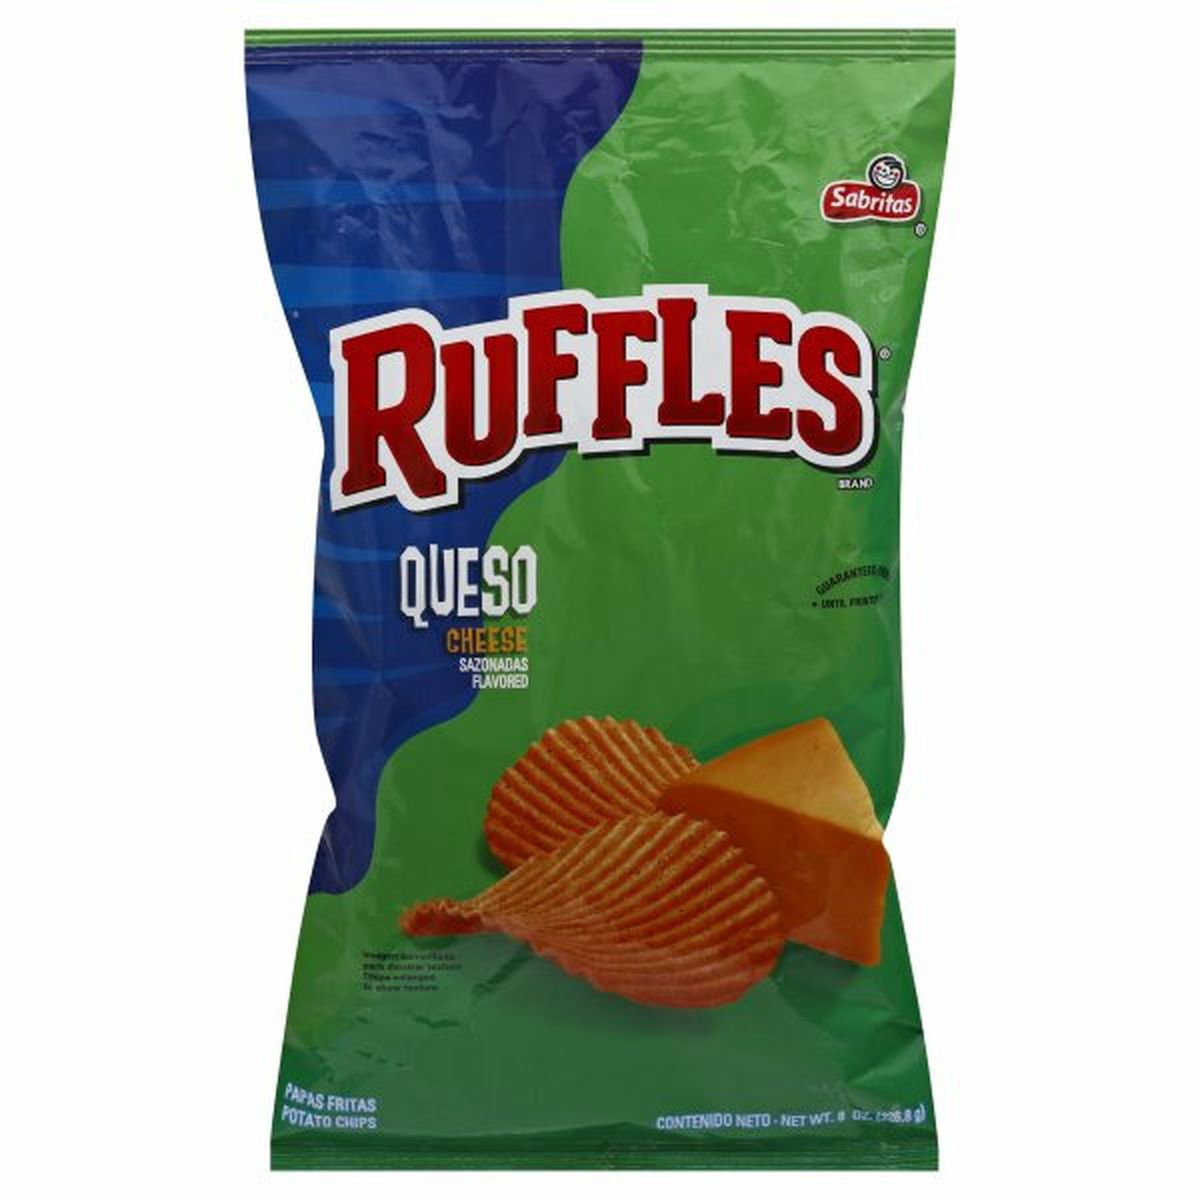 Calories in Ruffles Potato Chips, Cheese Flavored